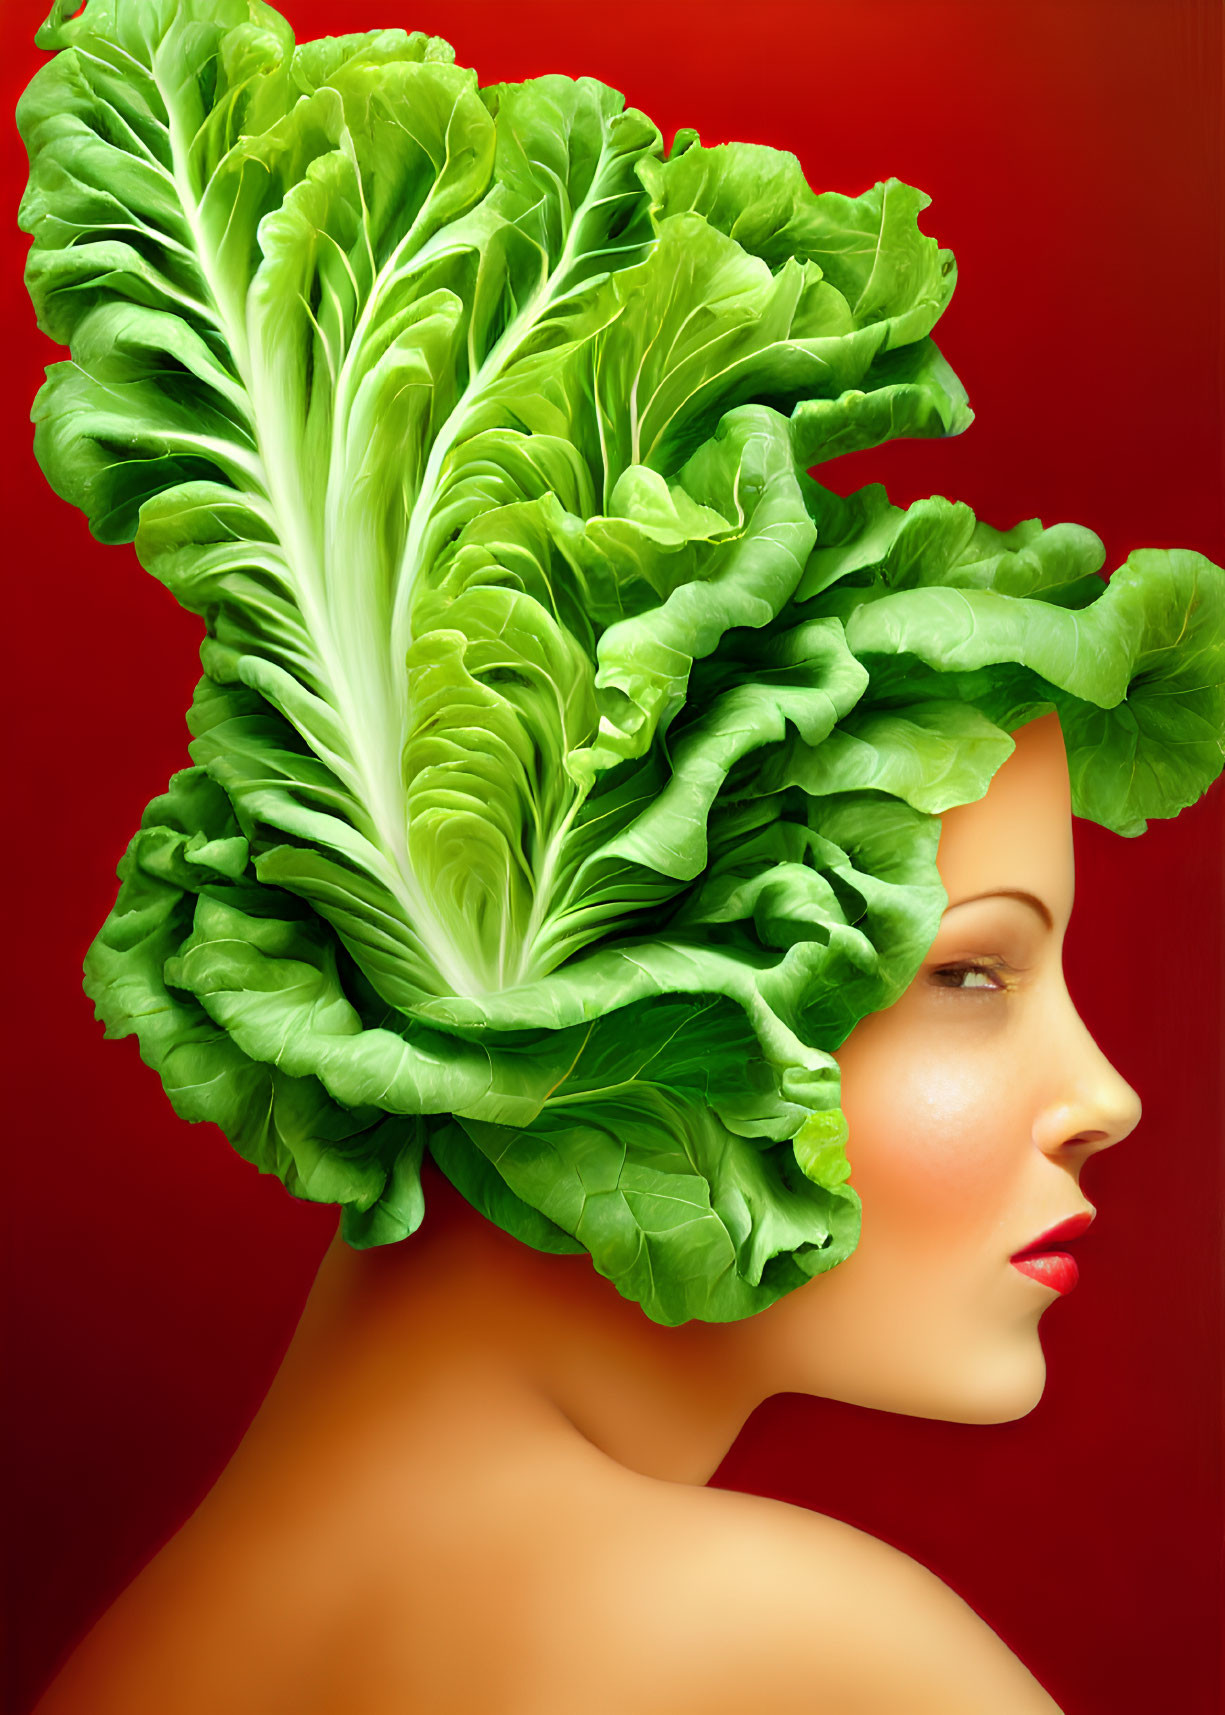 Surreal image of woman's profile with lettuce hair on red background